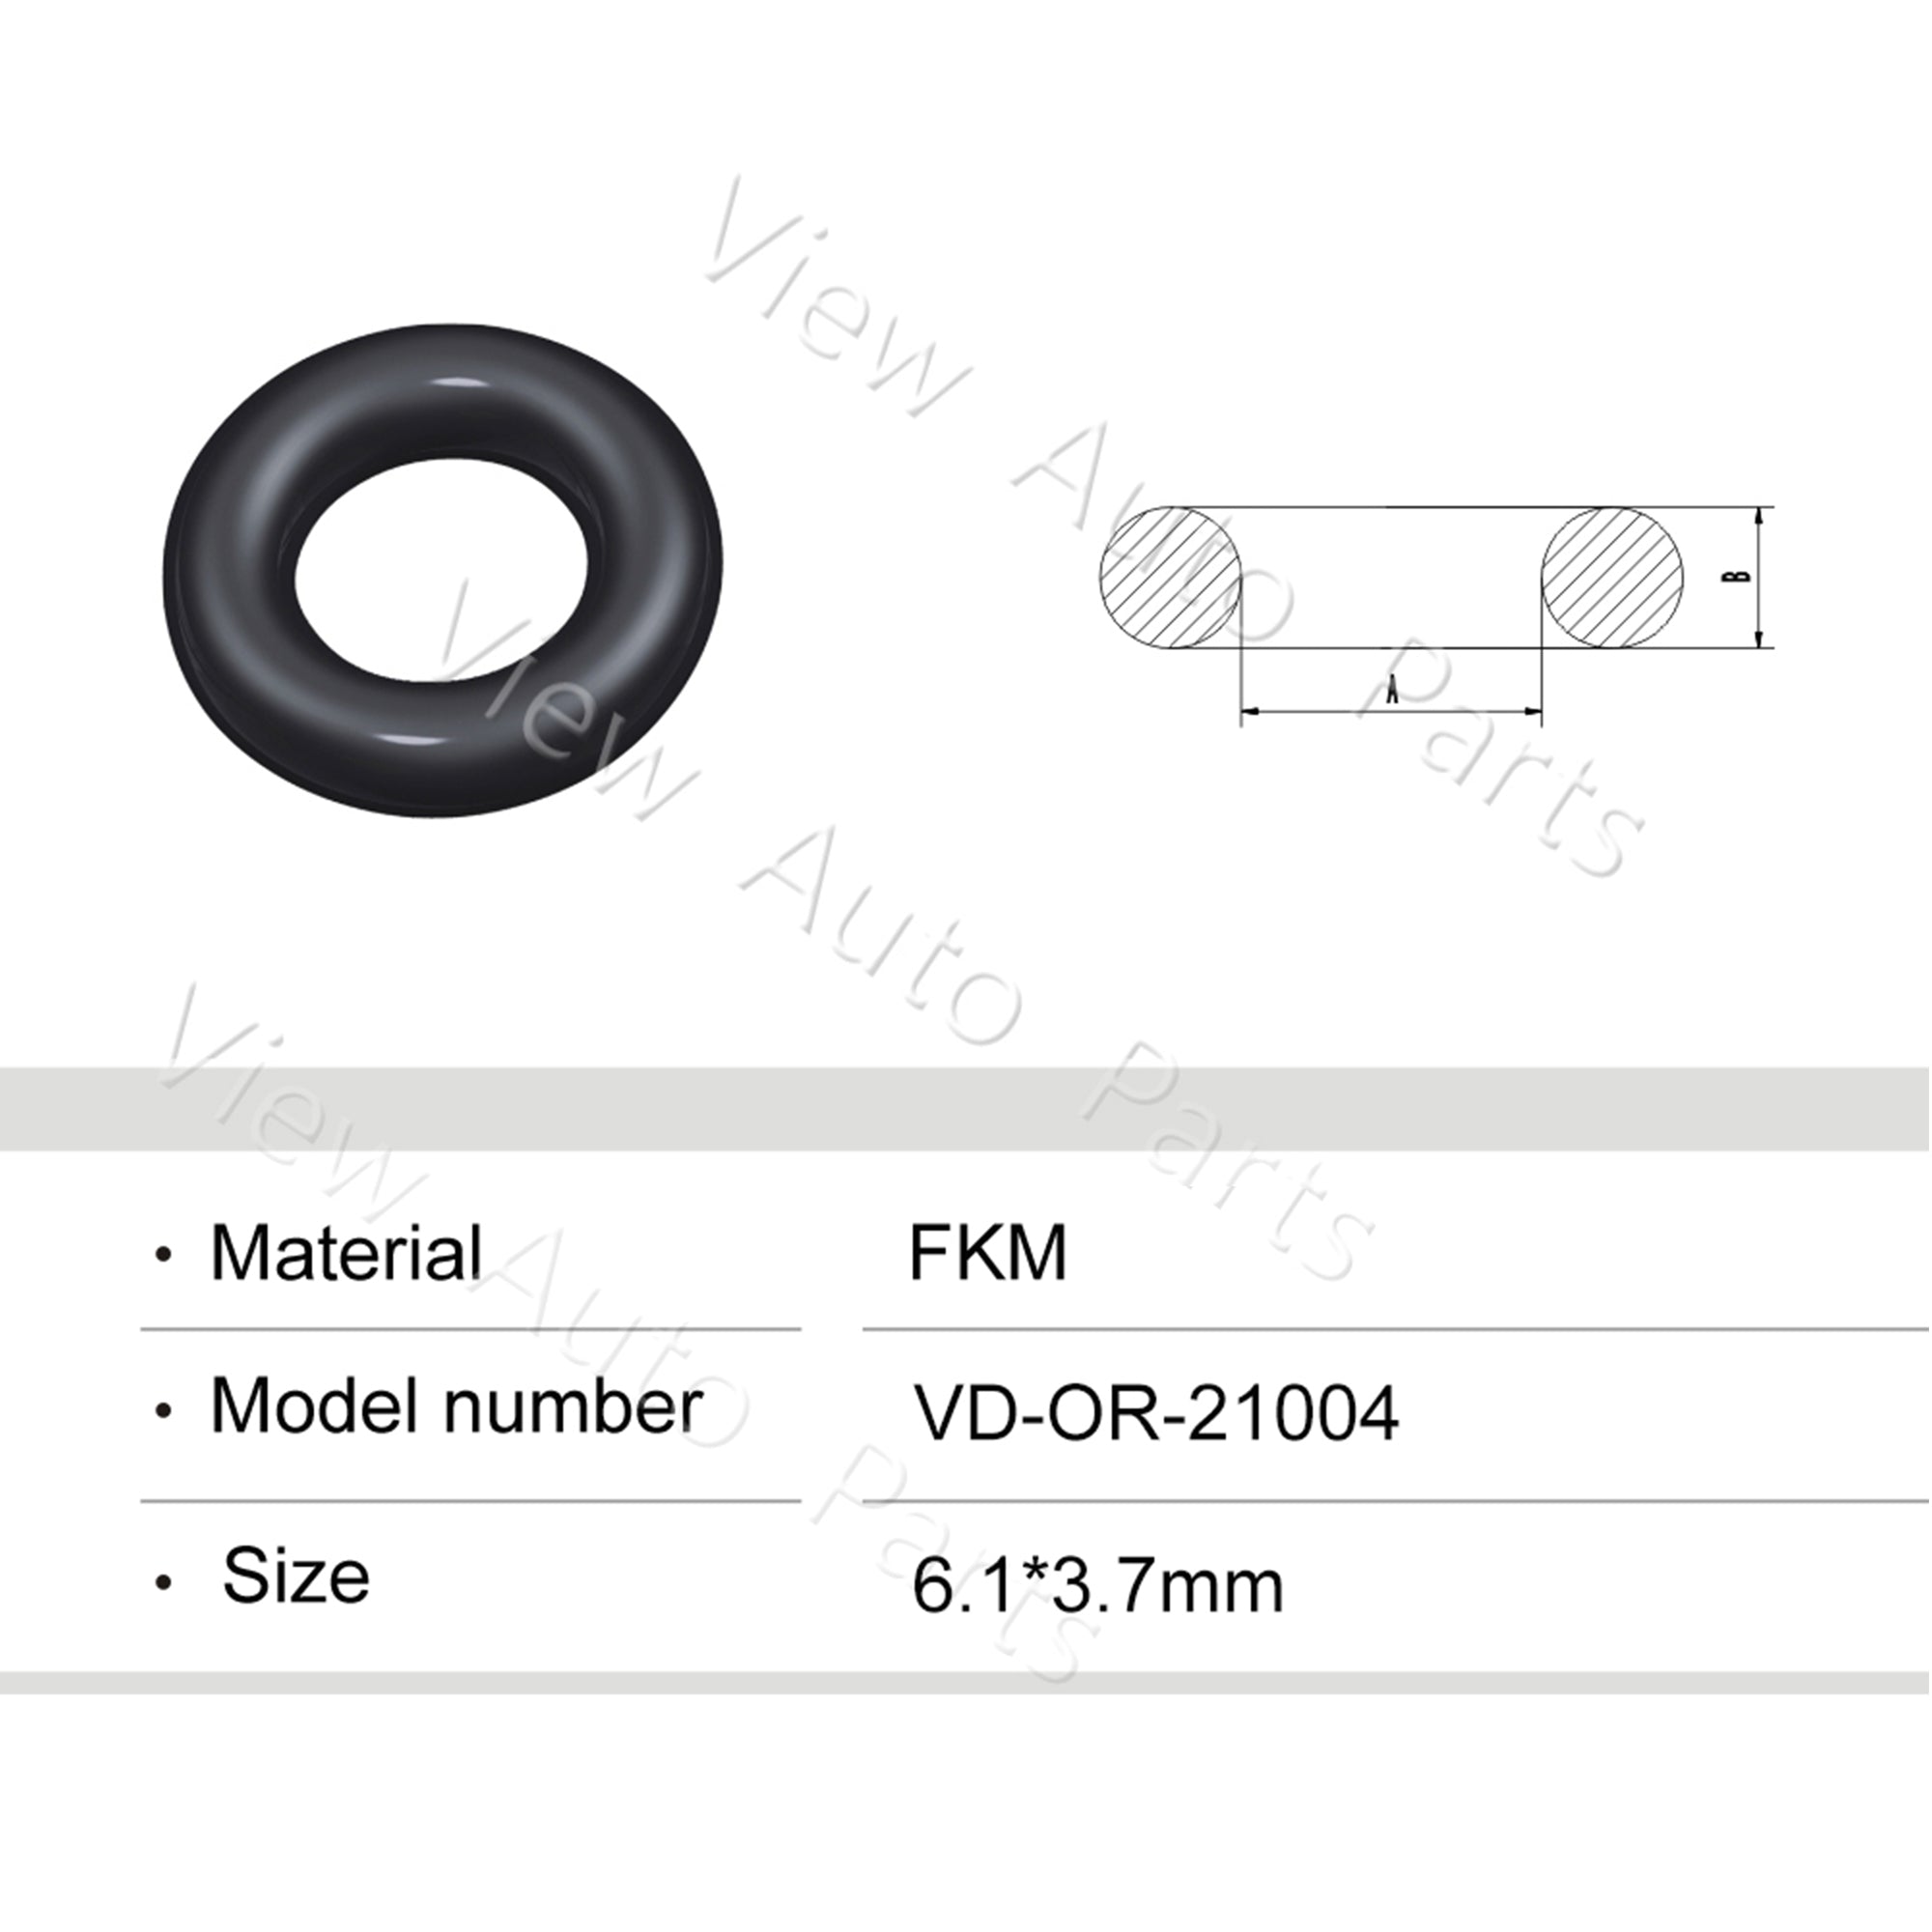 Fuel Injector Rubber Seal Orings for Fuel Injector Repair Kits FKM & Rubber Heat Resistant, Size: 6.1*3.7mm OR-21004